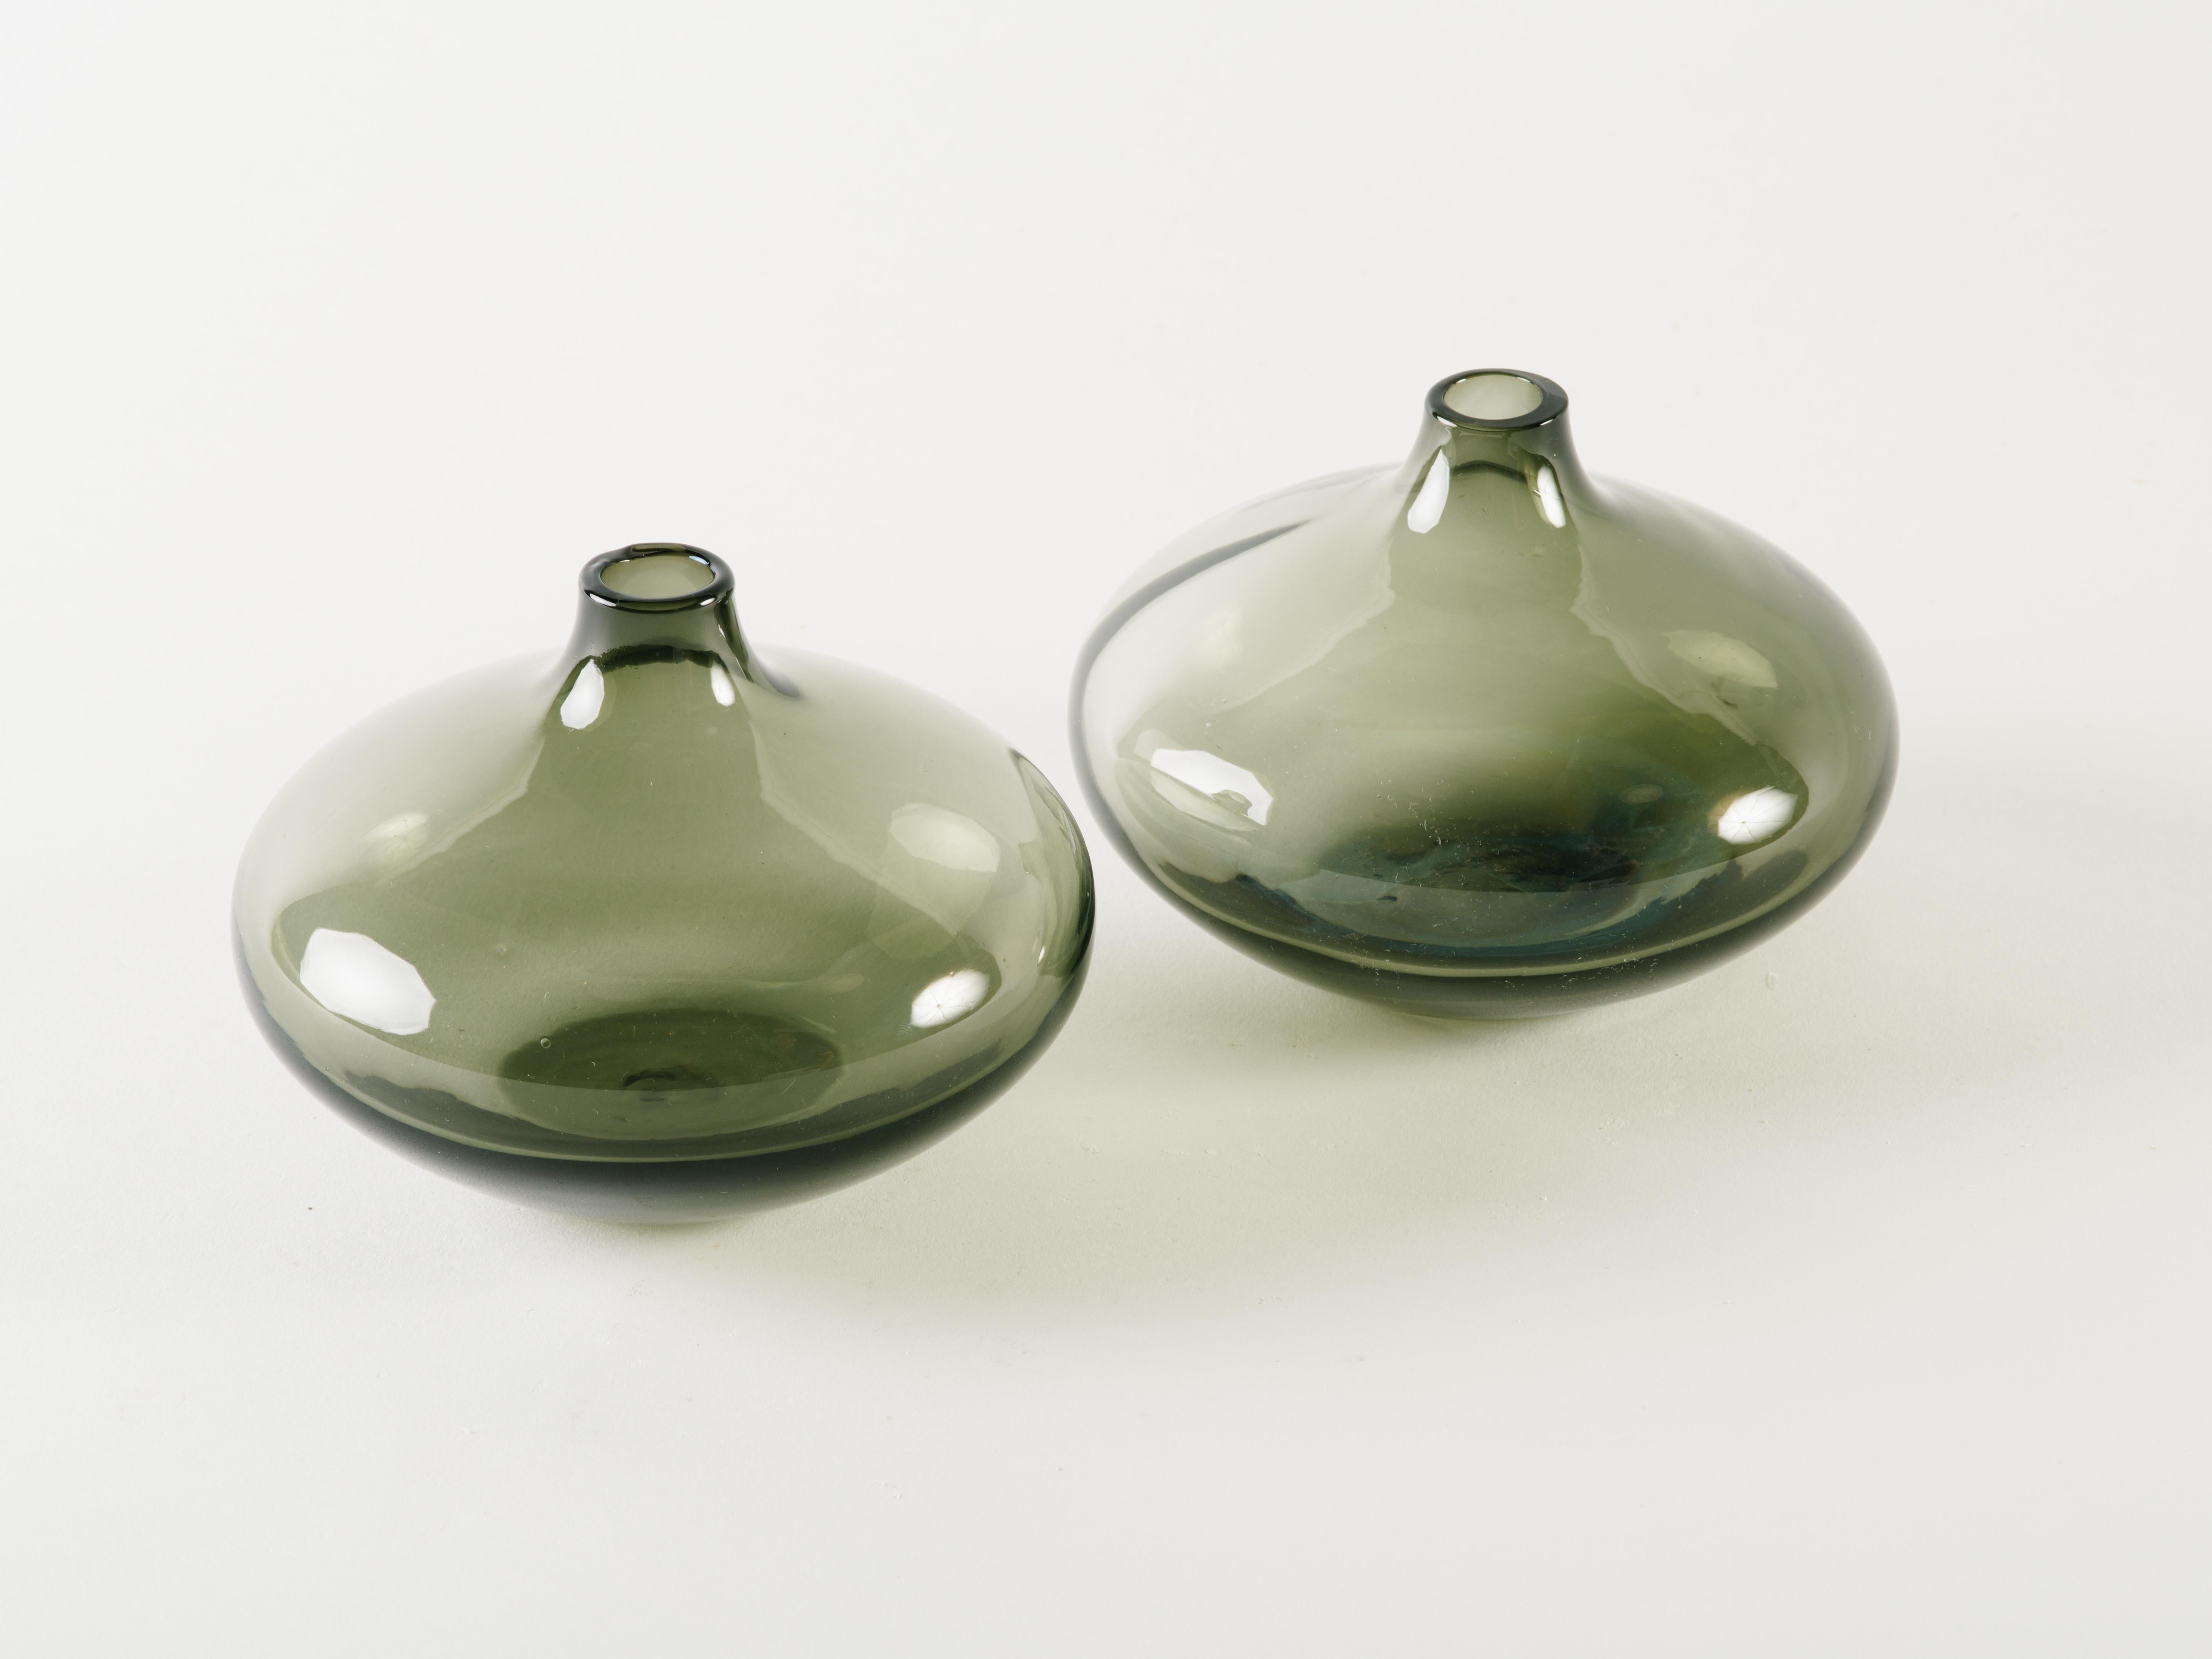 Pair of Mid-Century Modern blown glass vases in hues of smoked grey or translucent black. Bud vases have elegant teardrop forms, reminiscent of small genie bottles. Small vessel opening perfect for single stem flowers.